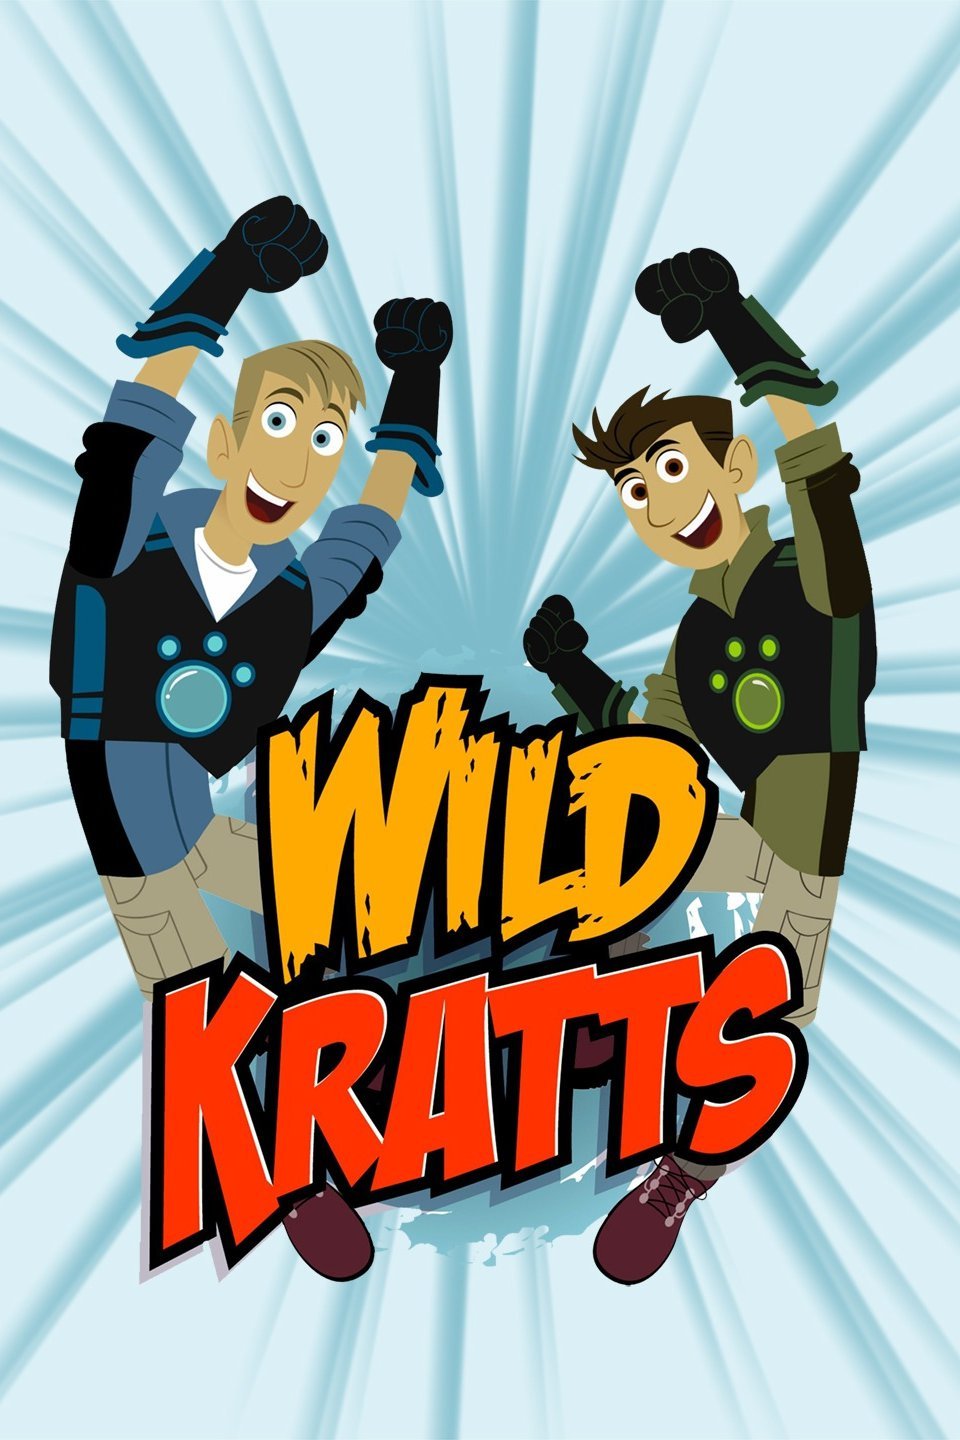 The Wild Kratts are coming to town!